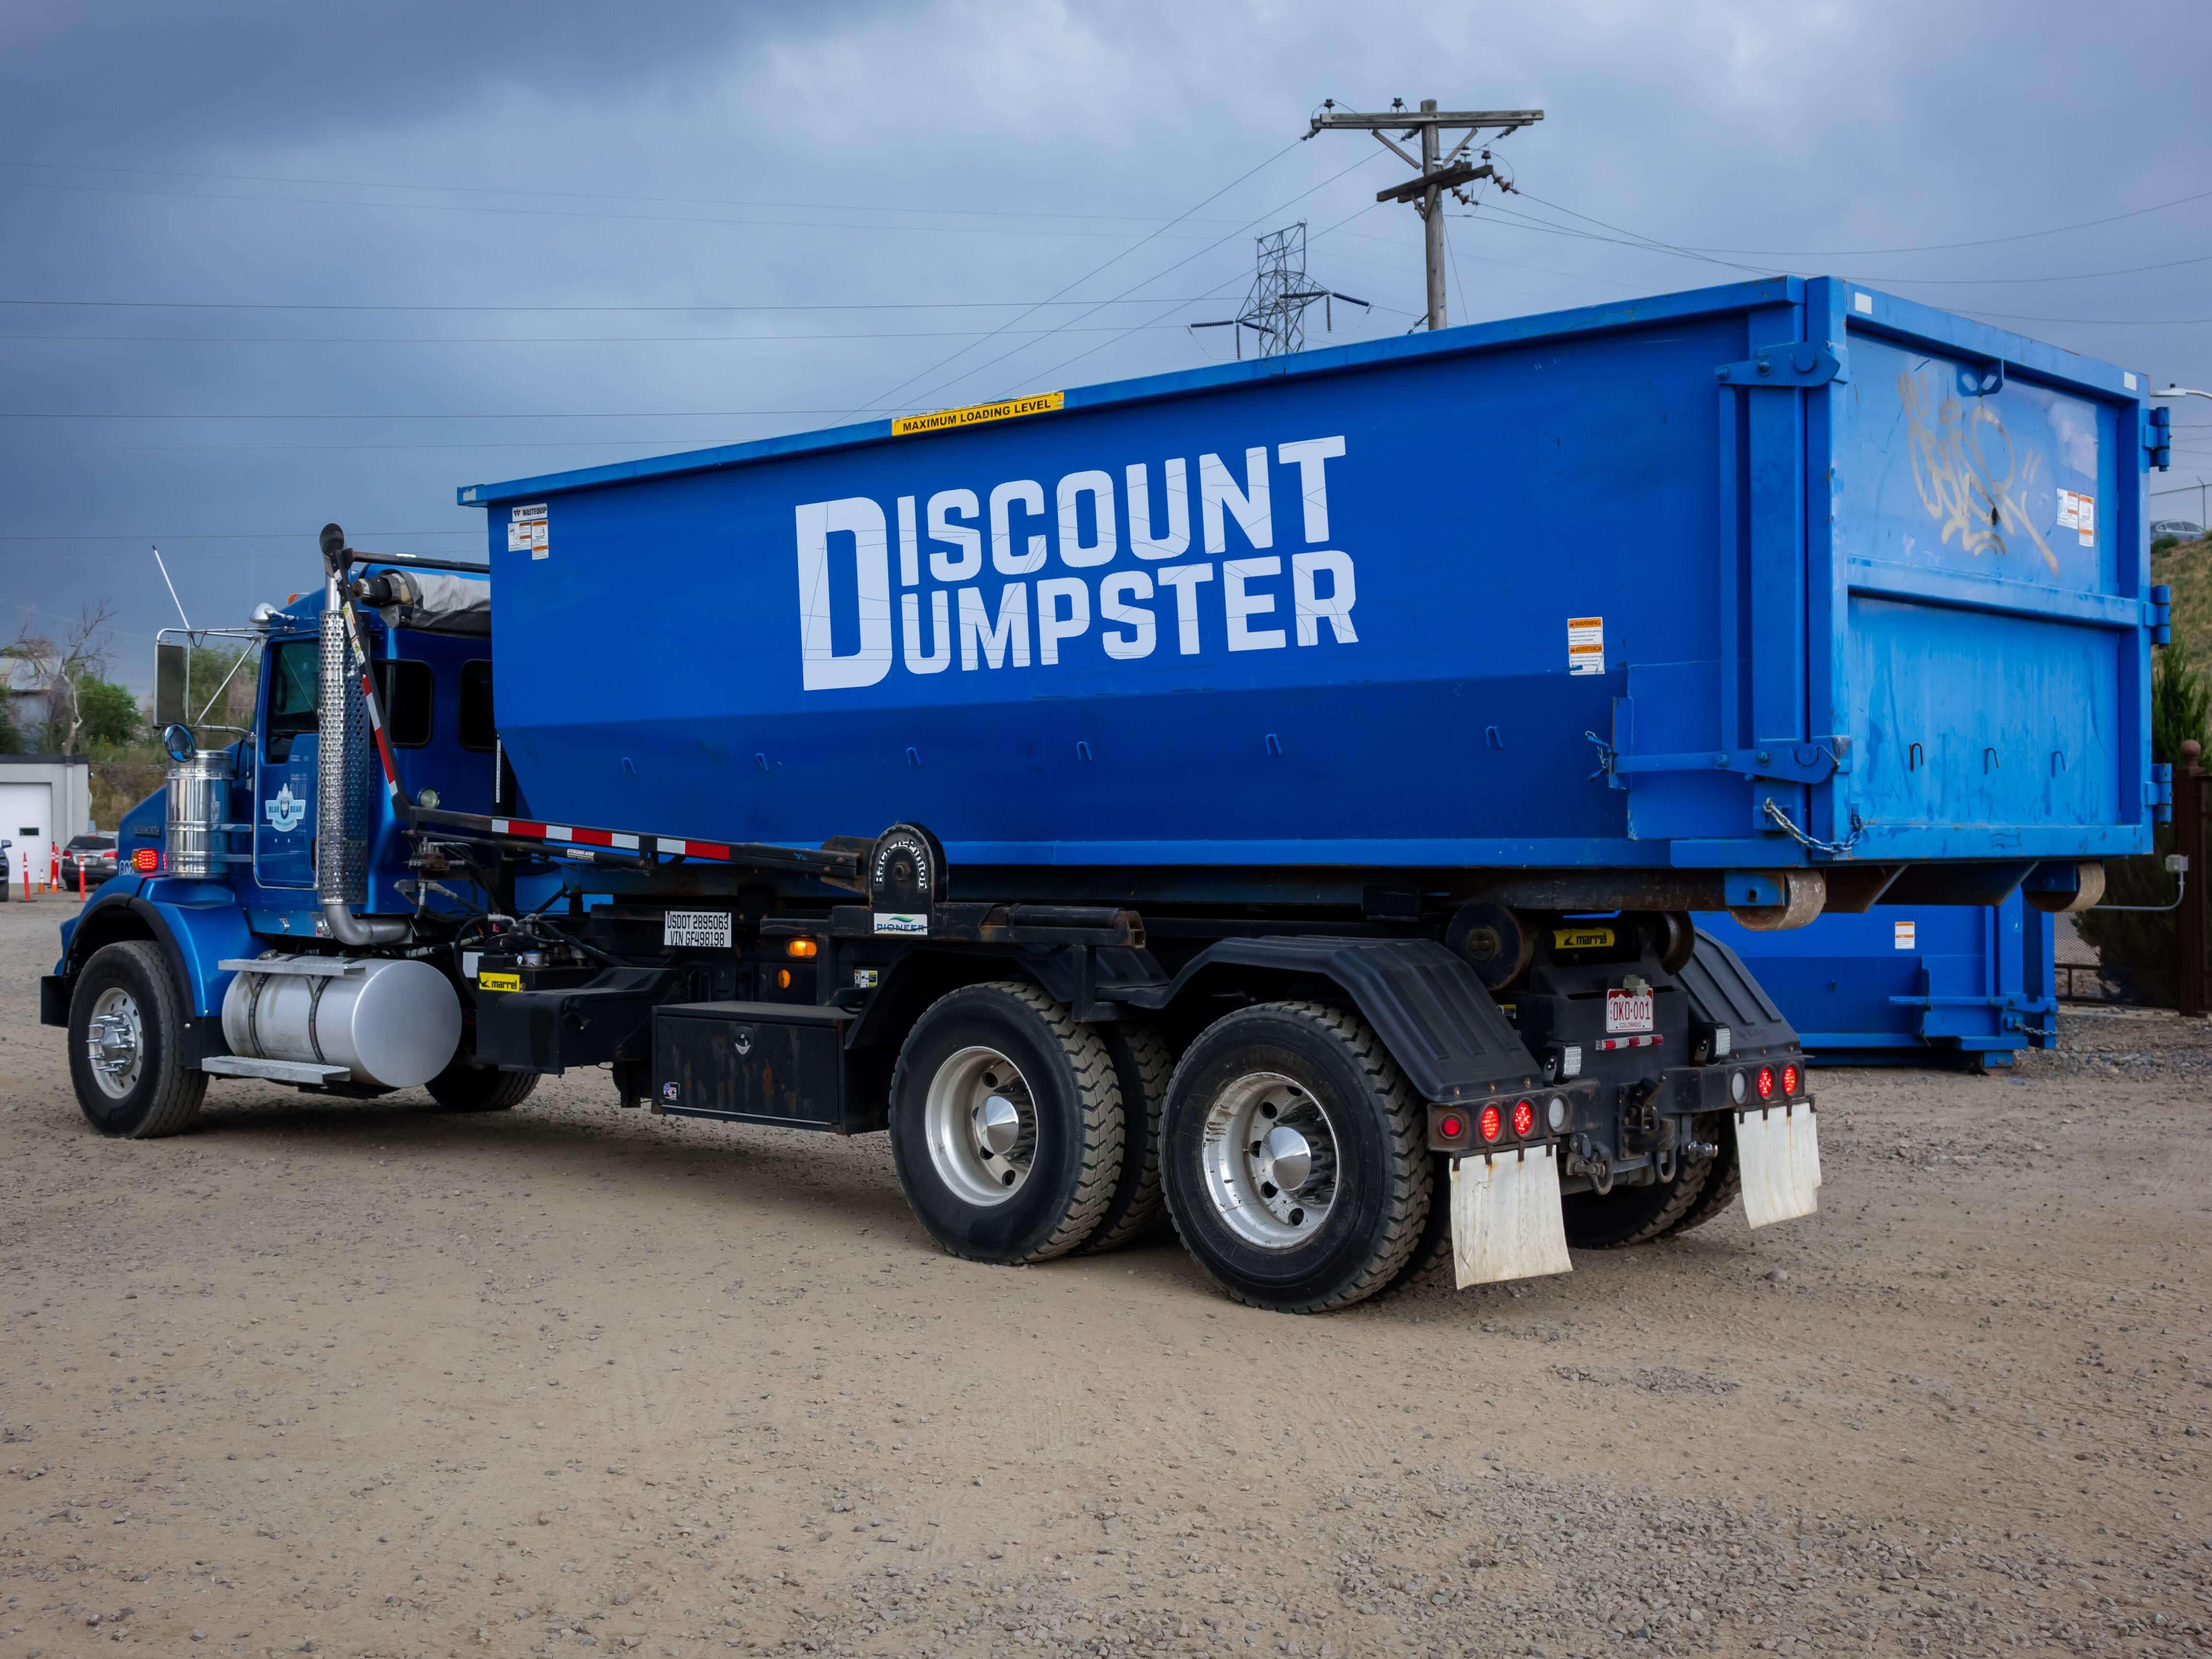 Discount dumpster has dumspters of all sizes for waste removal in chicago il Discount Dumpster Chicago (312)549-9198